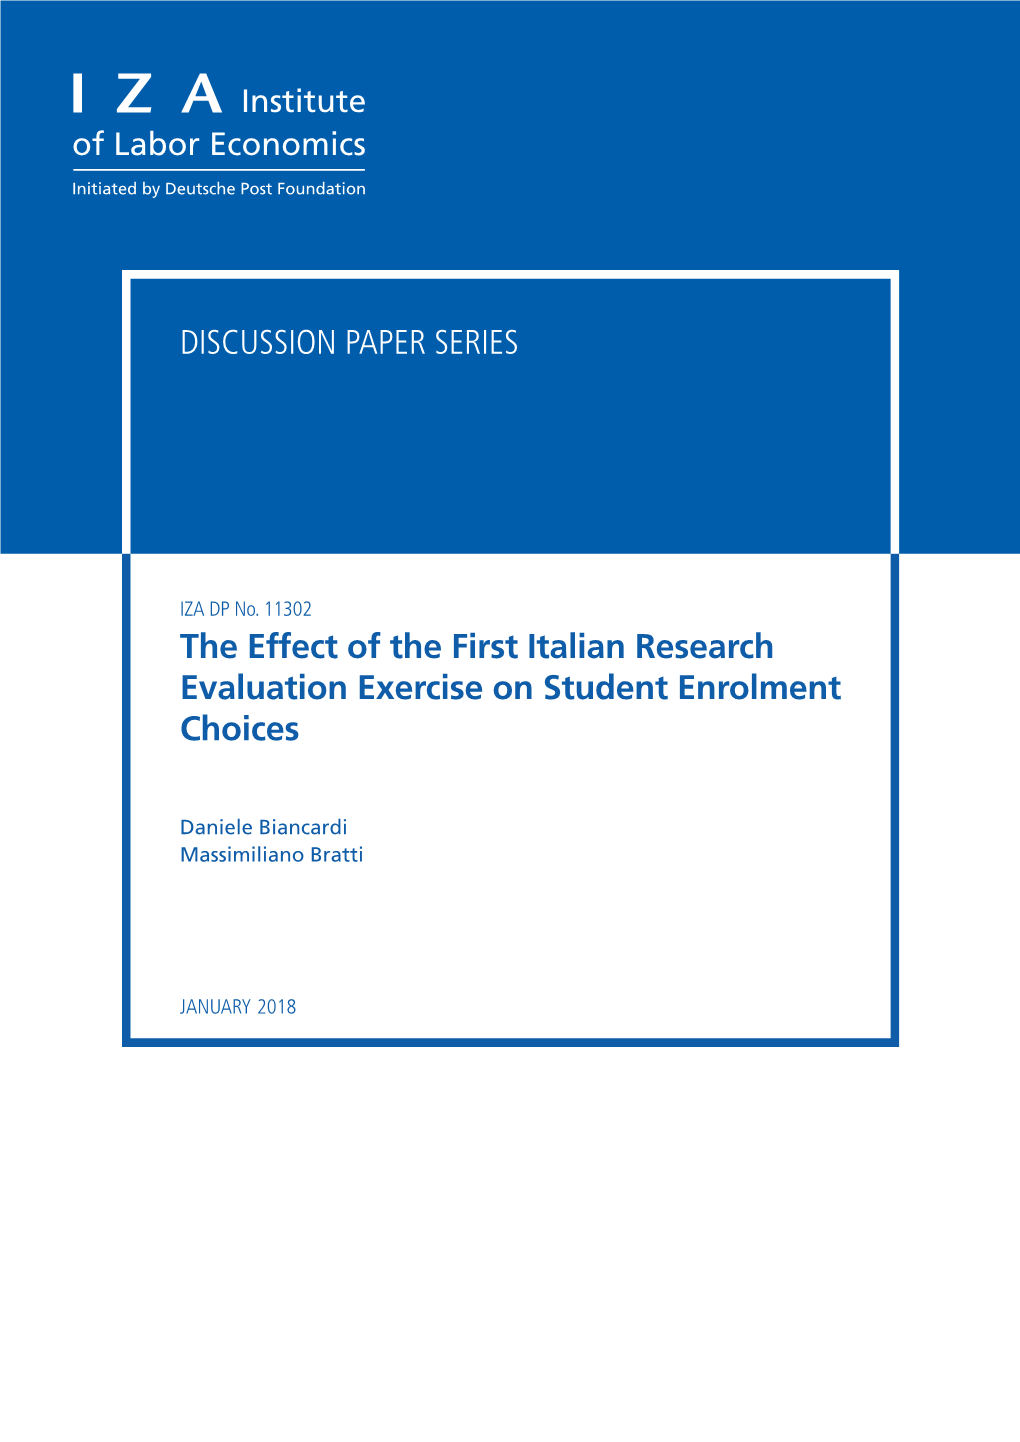 The Effect of the First Italian Research Evaluation Exercise on Student Enrolment Choices